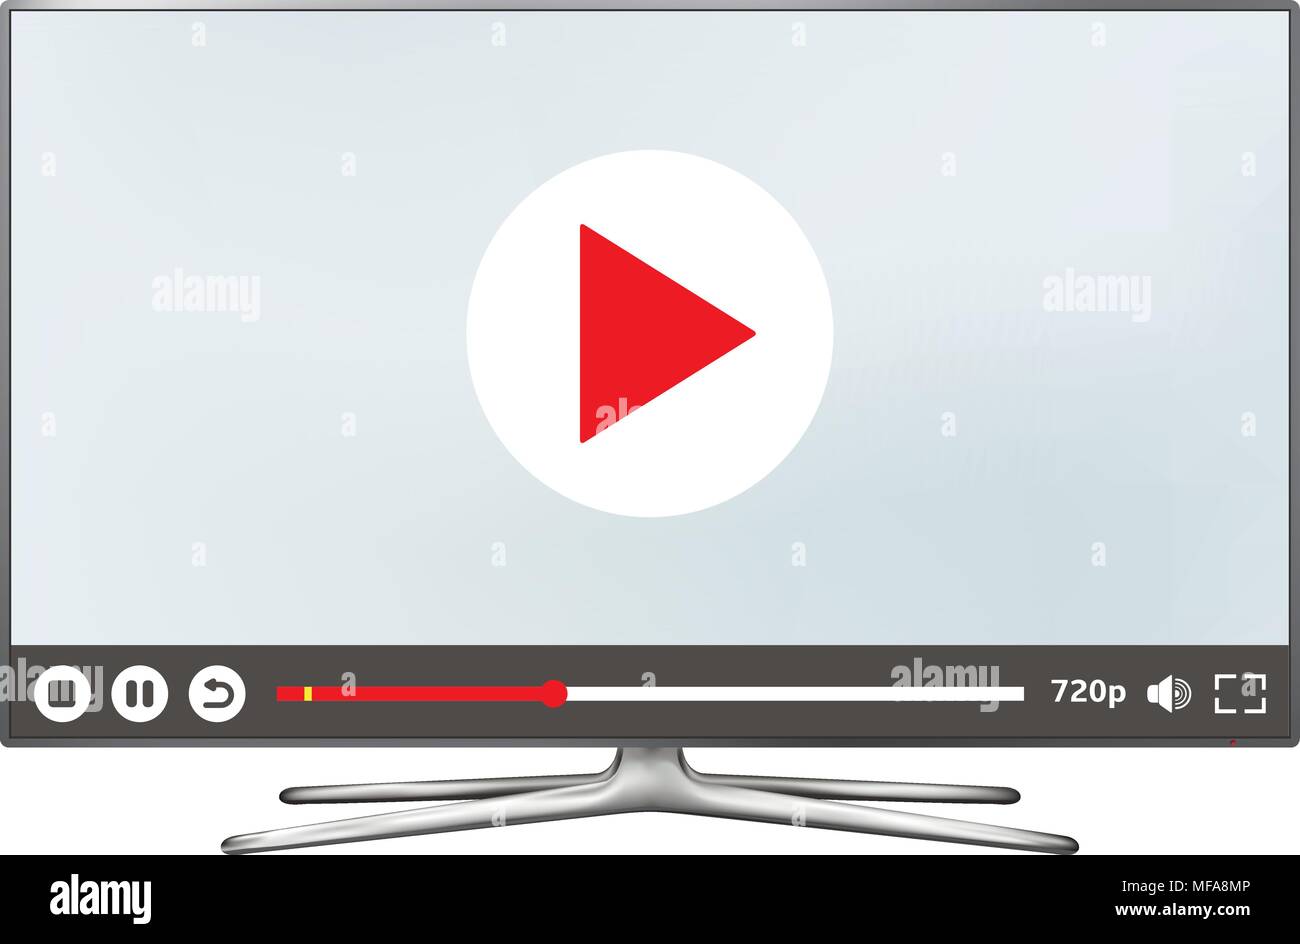 Smart TV LCD monitor with video player on screen. Vector illustration. Stock Vector